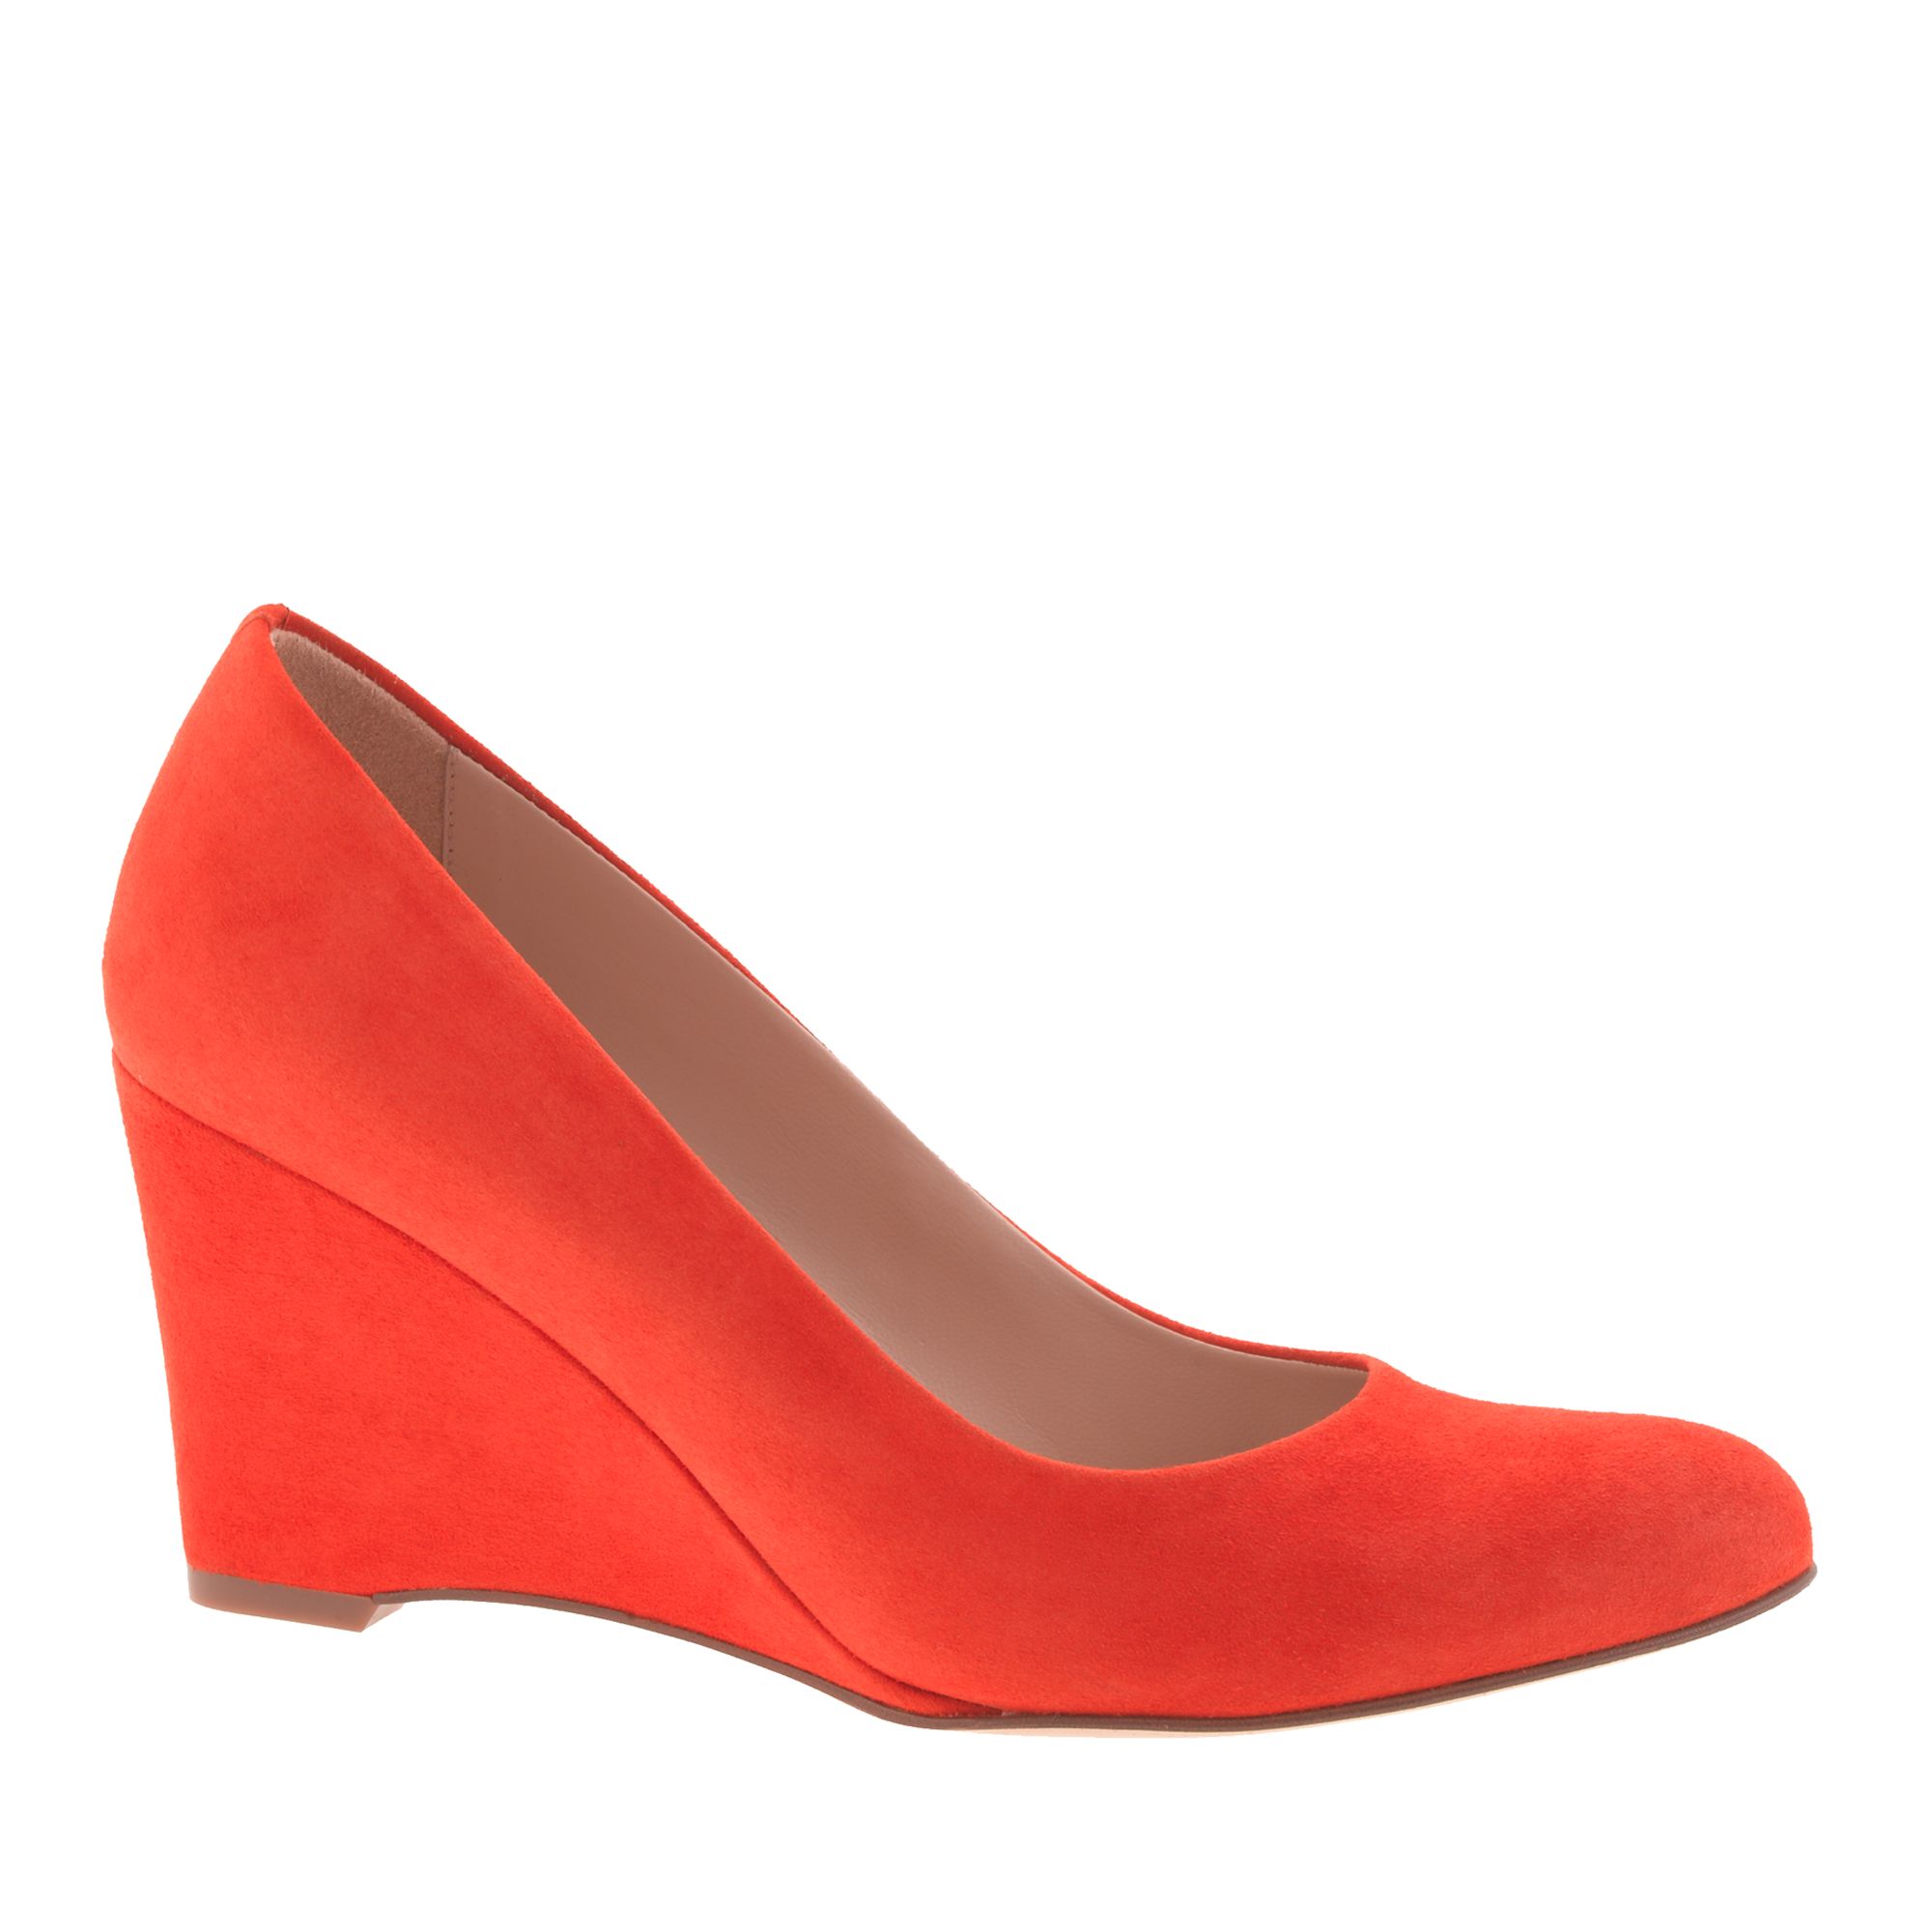 J.crew Martina Suede Wedges in Red | Lyst